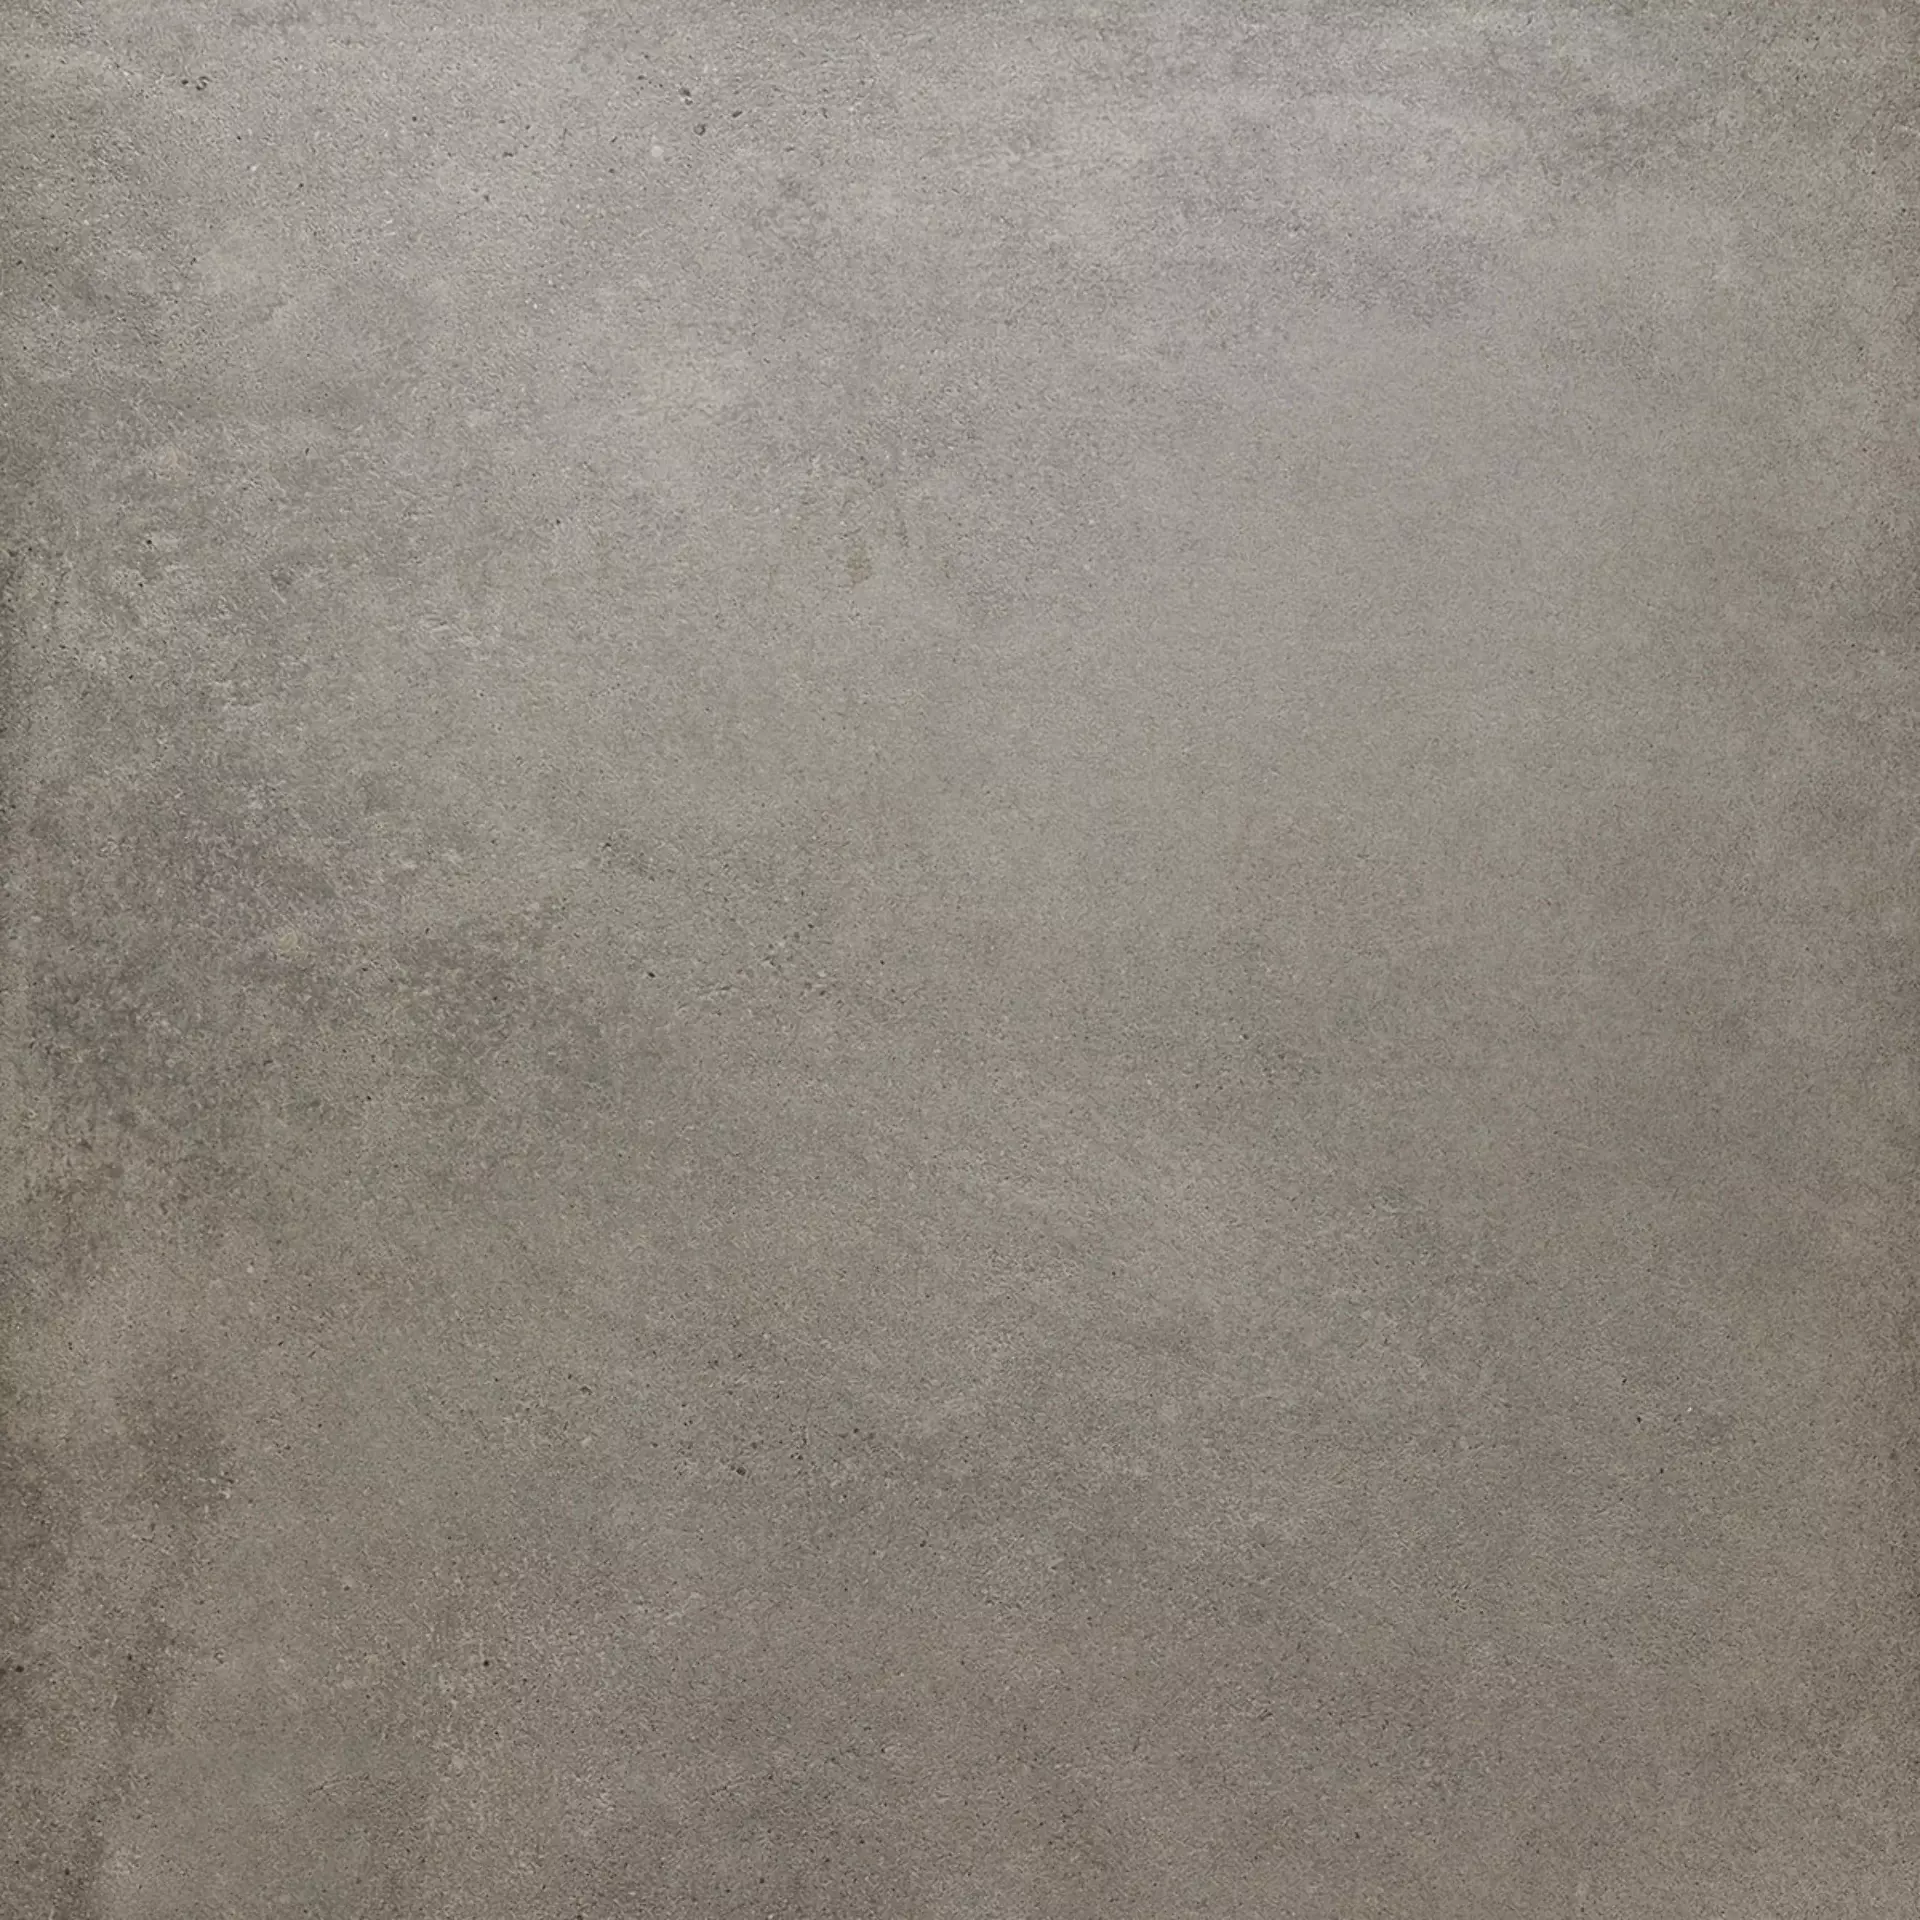 Rondine Loft Taupe Naturale J89045 100x100cm rectified 8,5mm